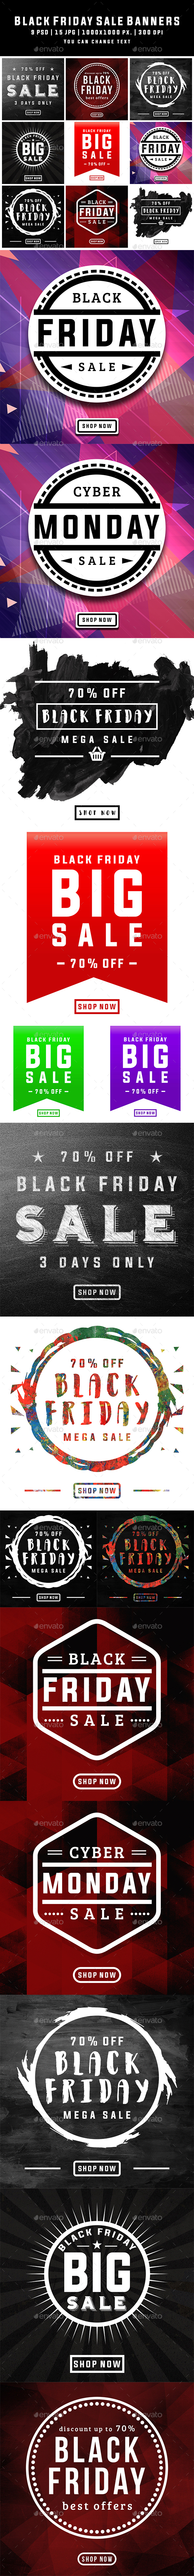 GraphicRiver Black Friday Sale Banners 20827602